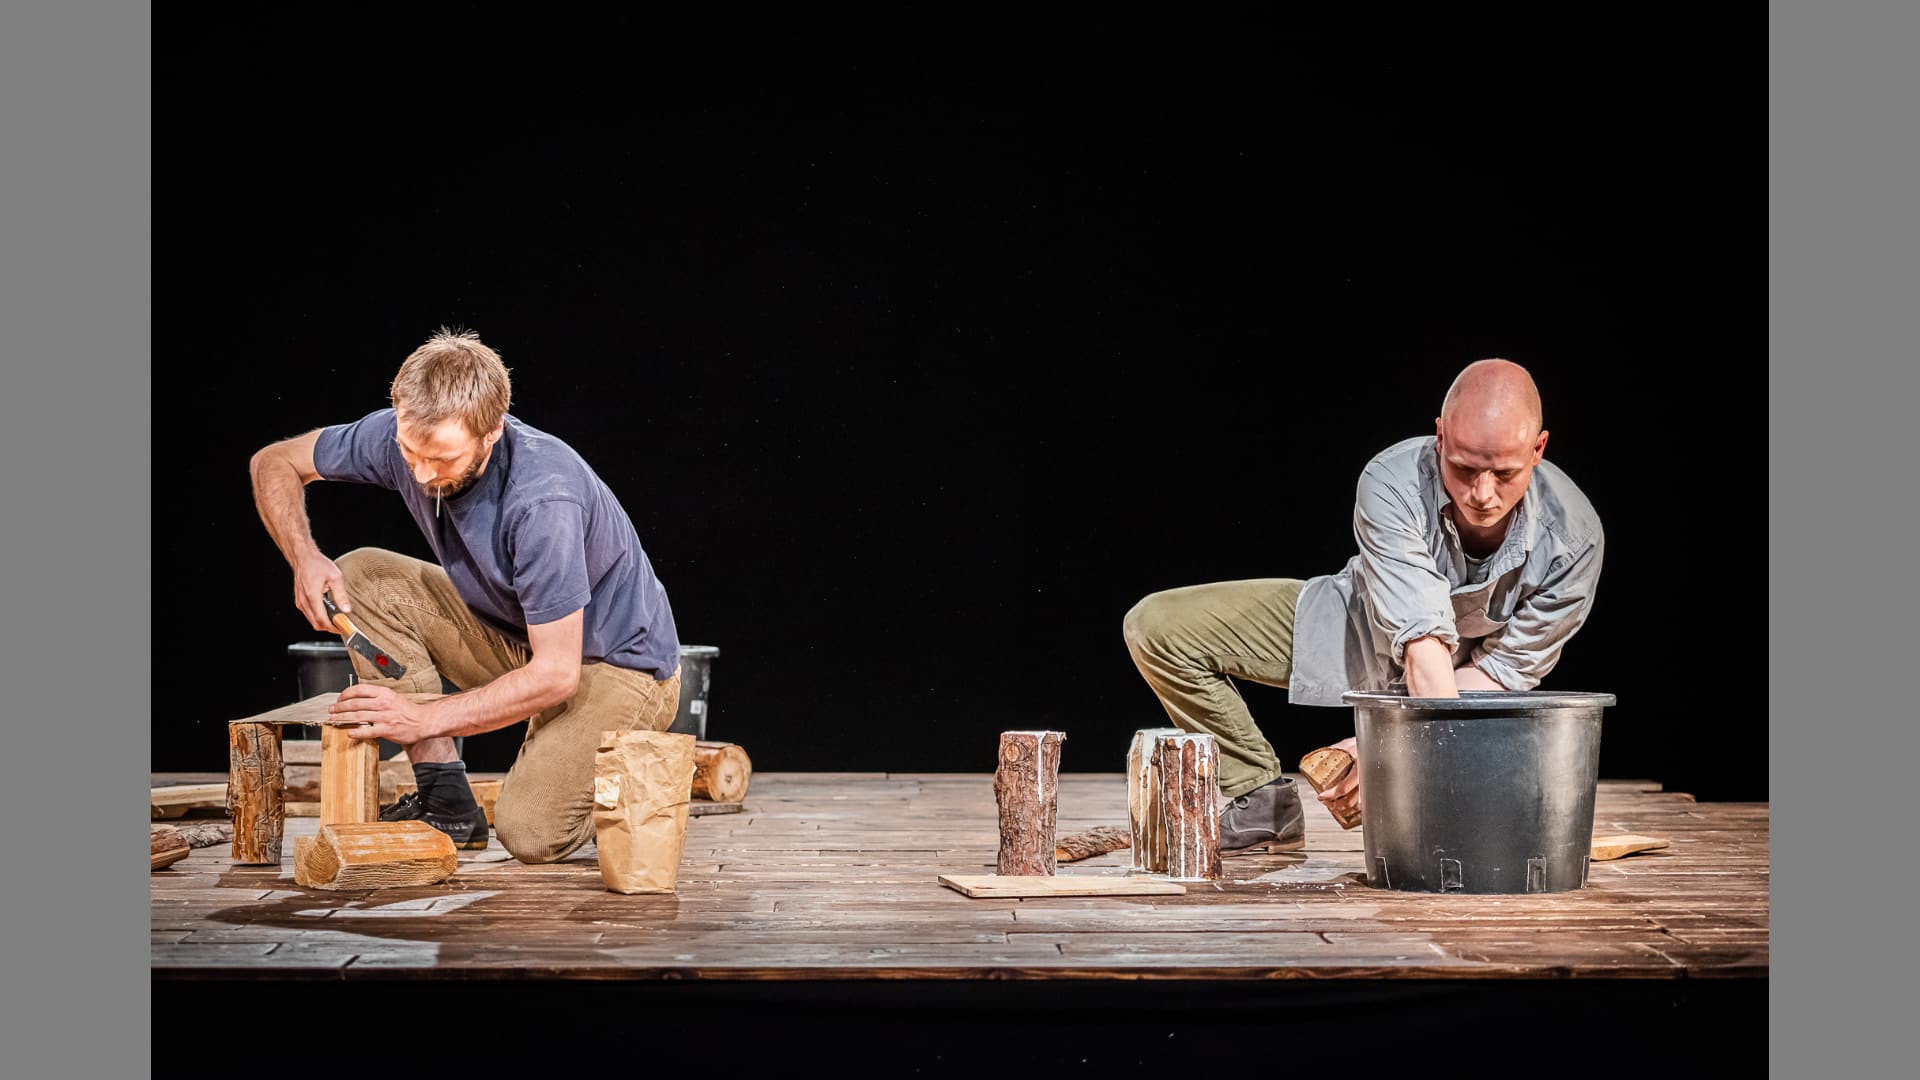 A performer crouches on the stage while doing woodwork. Another performer reaches deep into a metal bucket